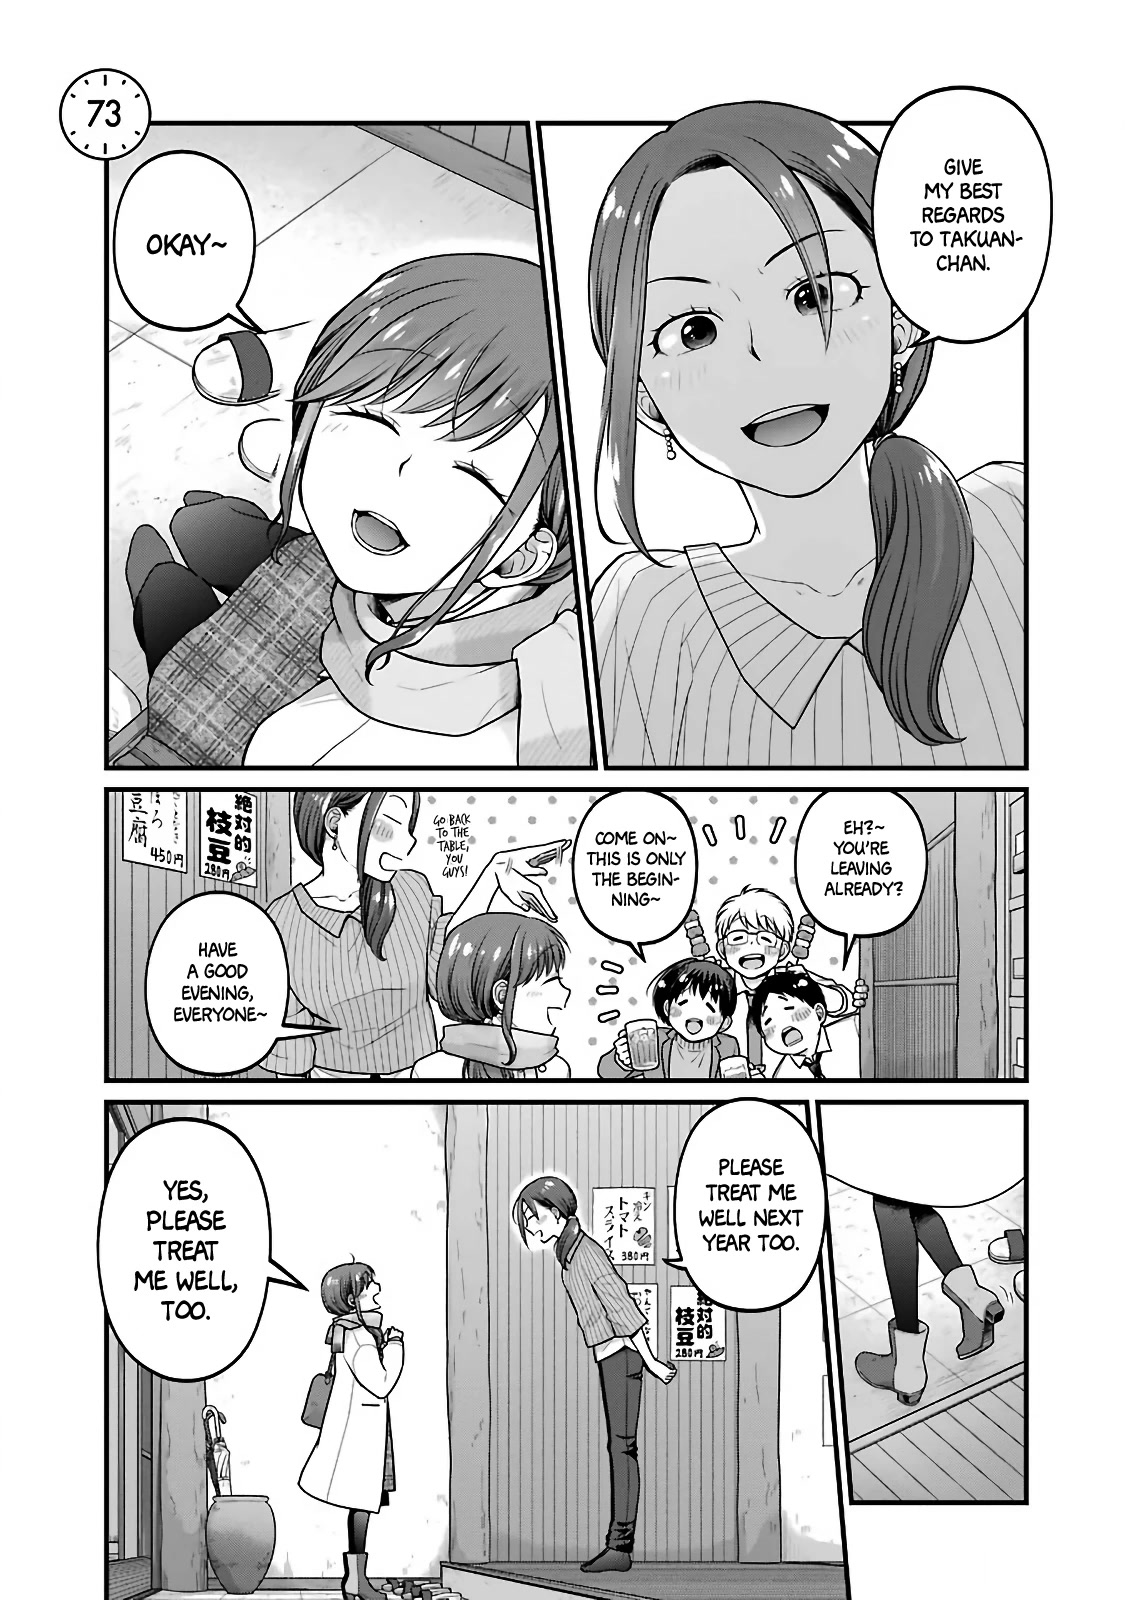 5 Minutes With You At A Convenience Store Chapter 73